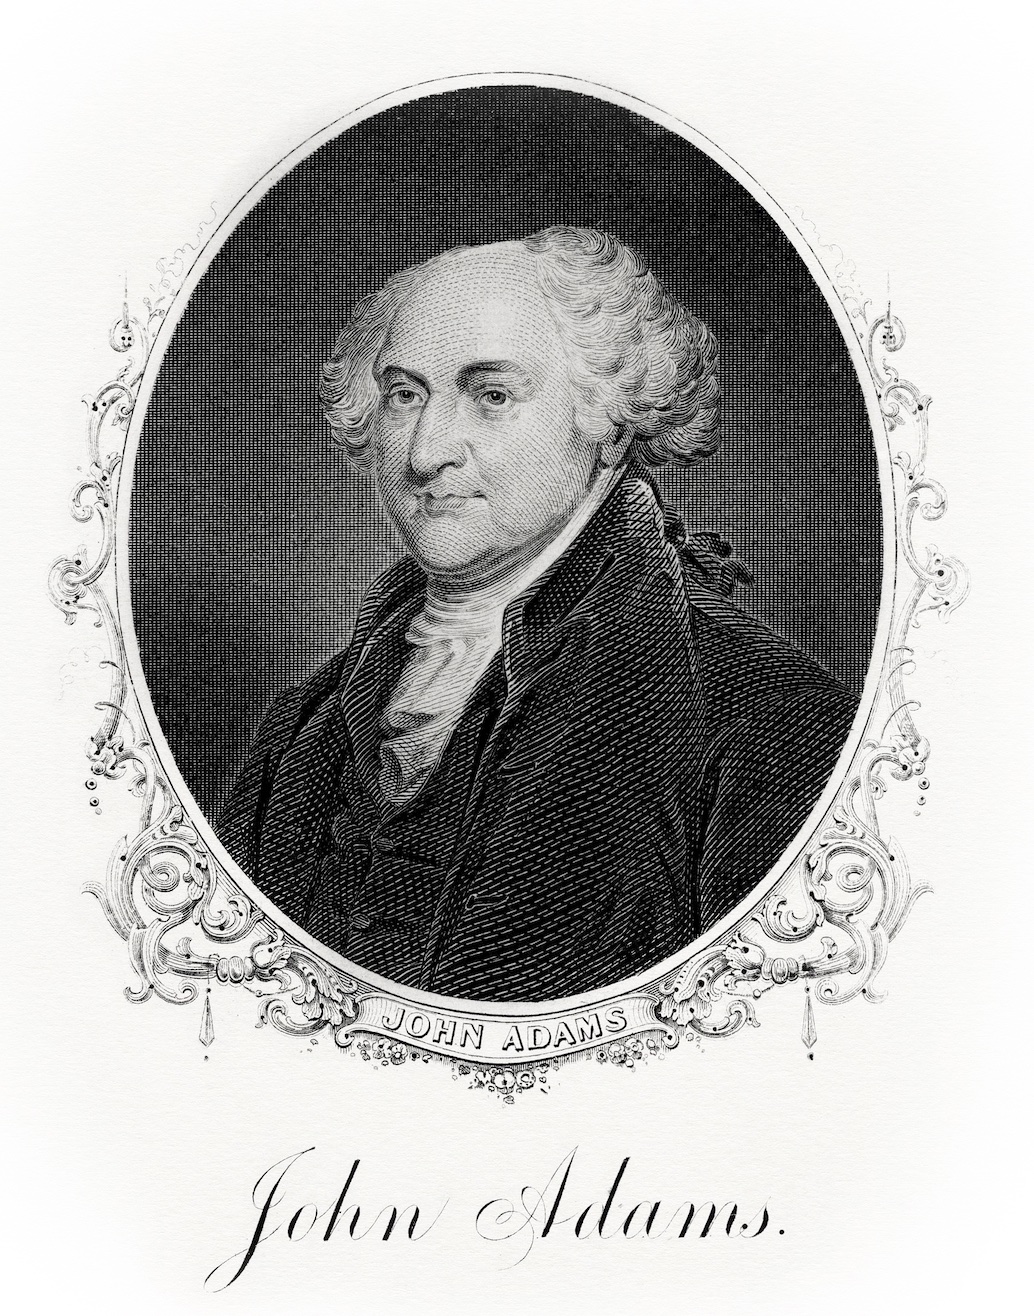 Portrait of John Adams as president by the Bureau of Engraving and Printing. (Public Domain)